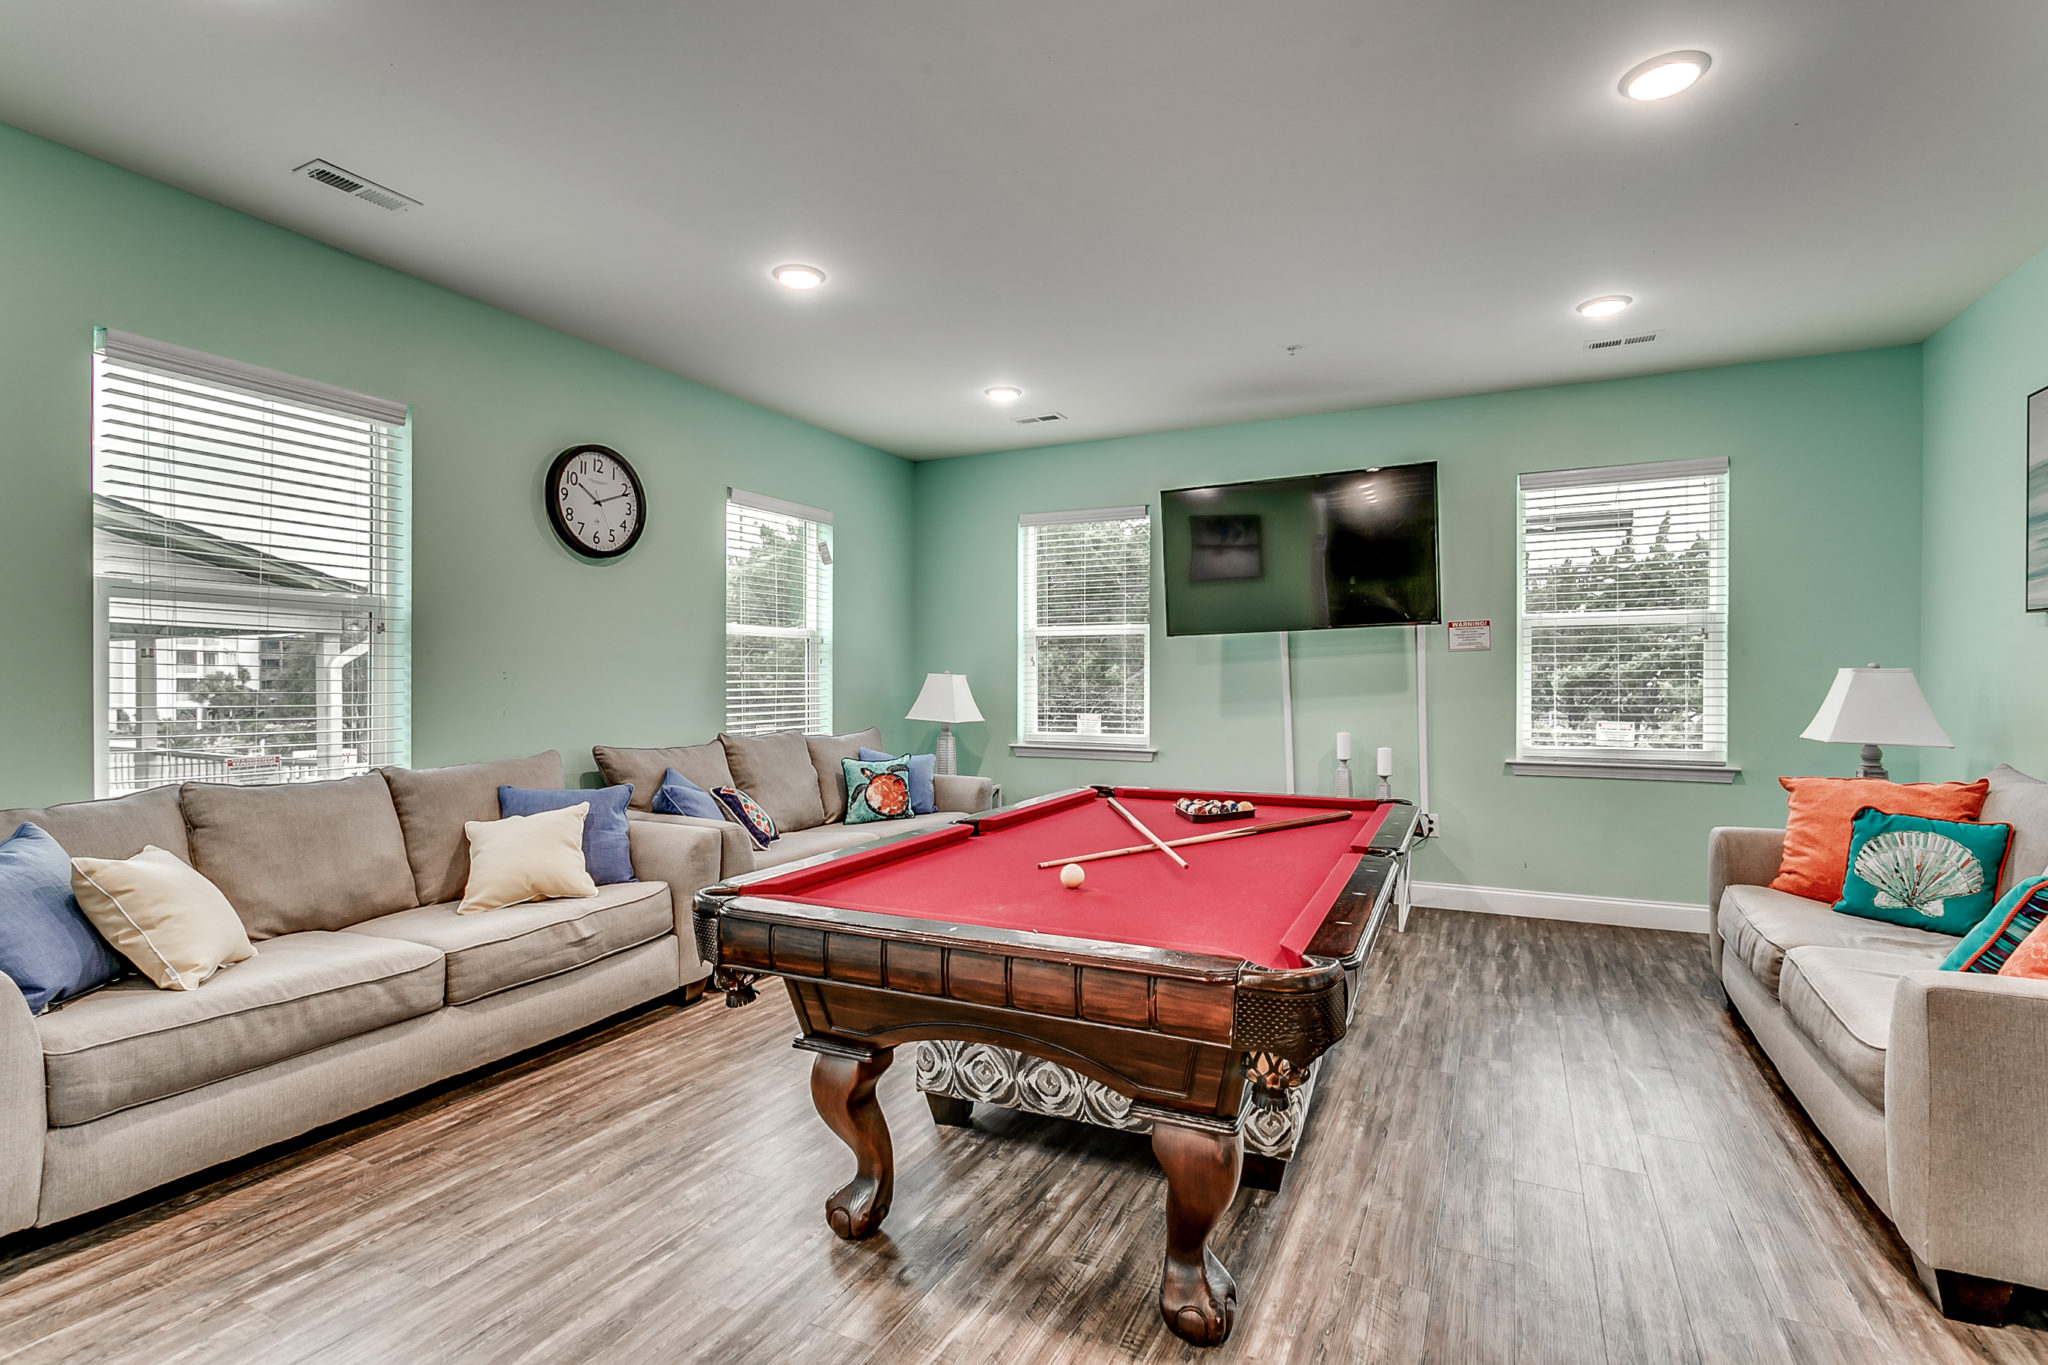 204 54th Ave - Unit B long game room.